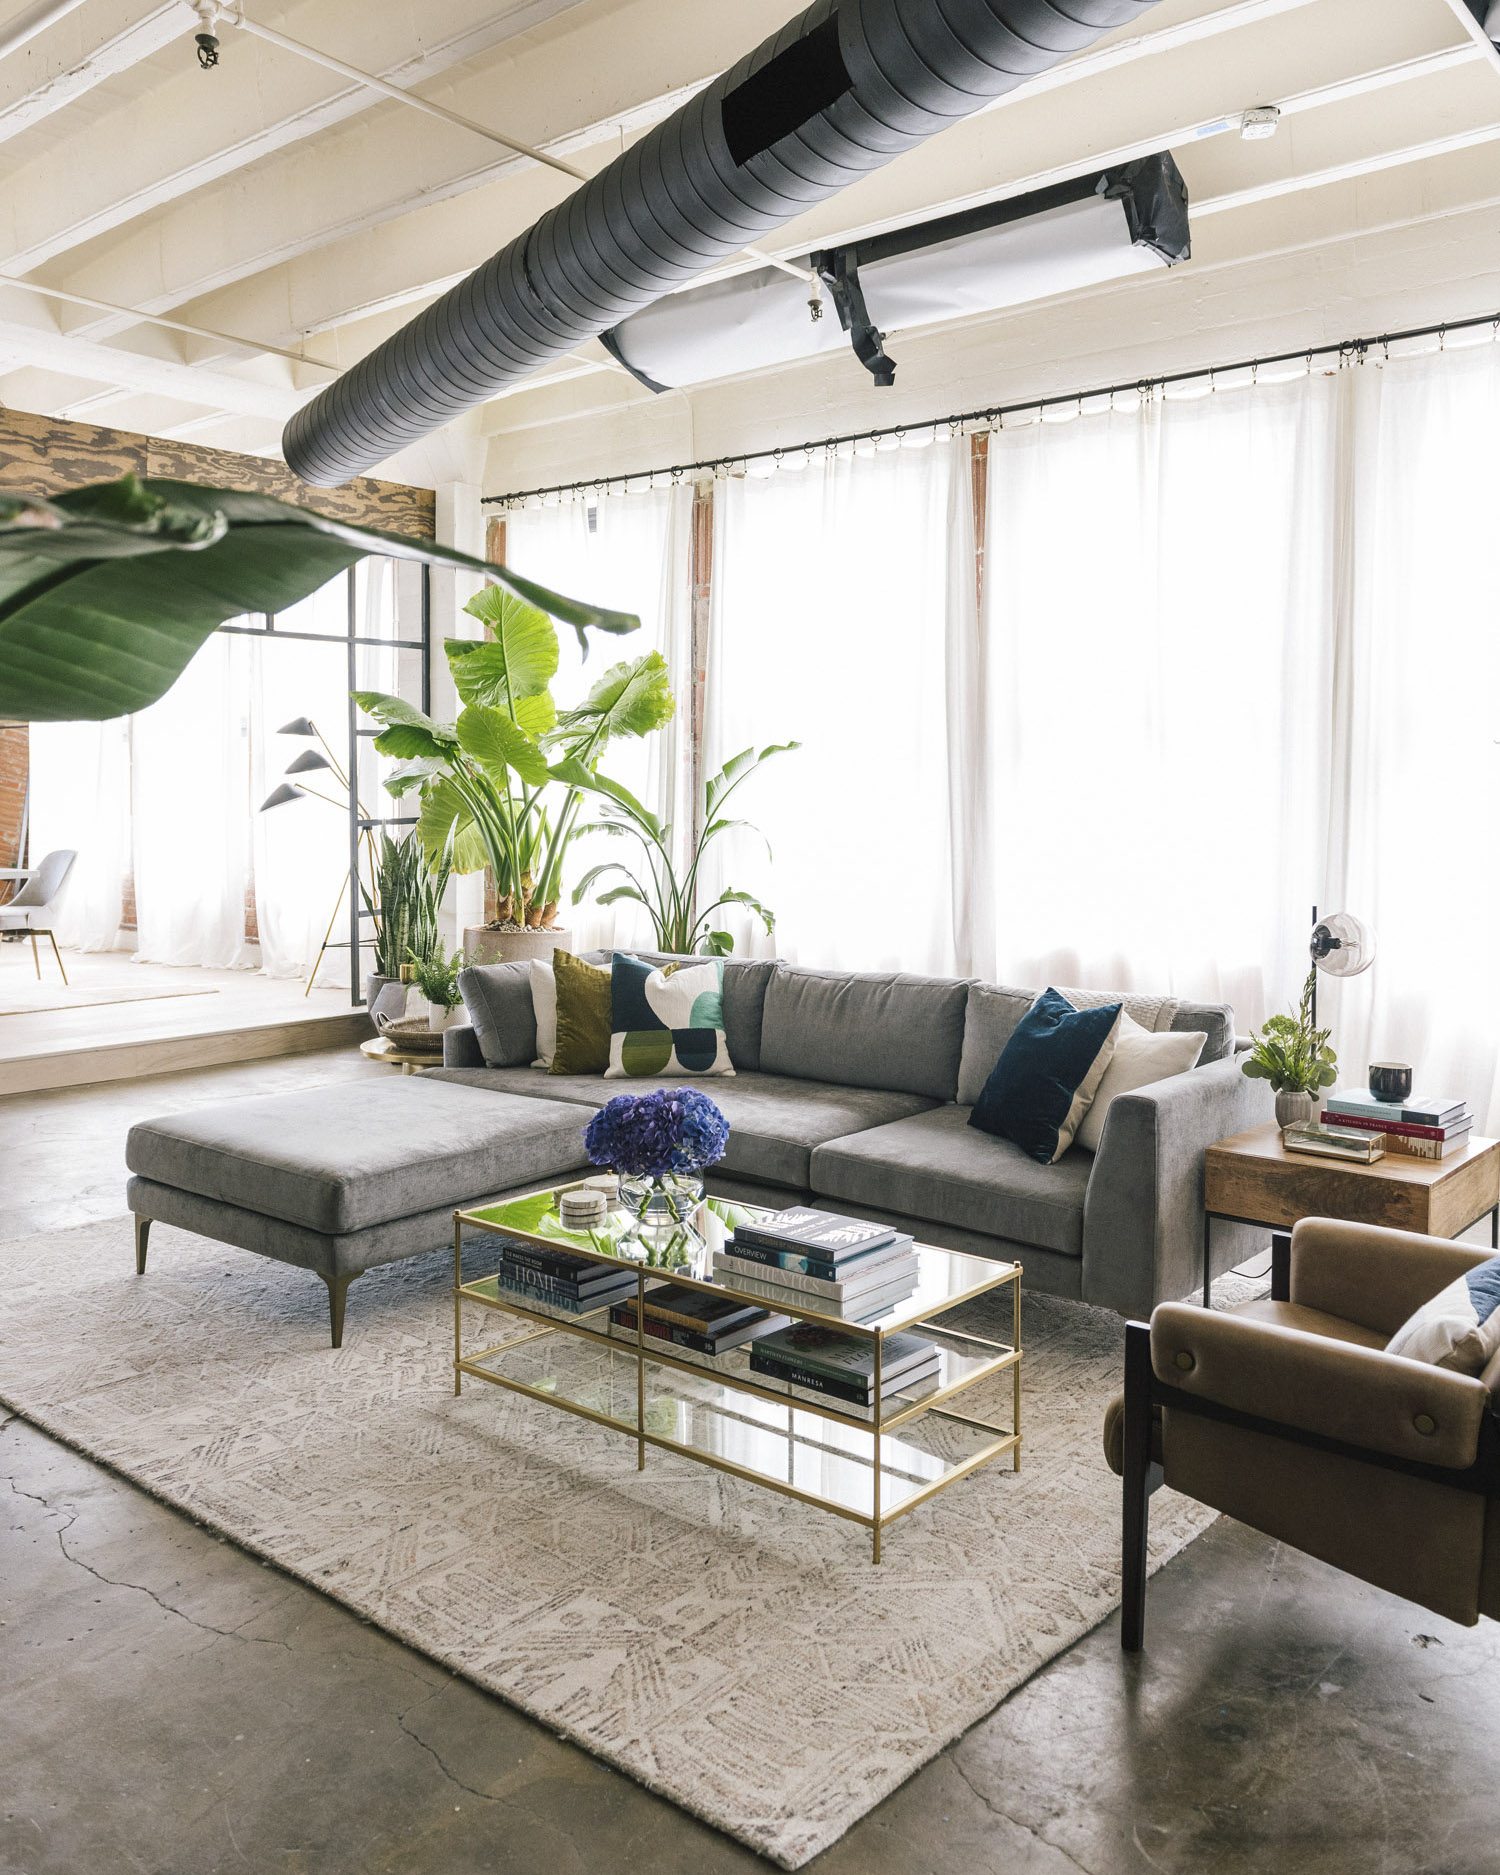 Stills from inside the Season Three "Queer Eye" loft, designed by cast member Bobby Berk in collaboration with West Elm.